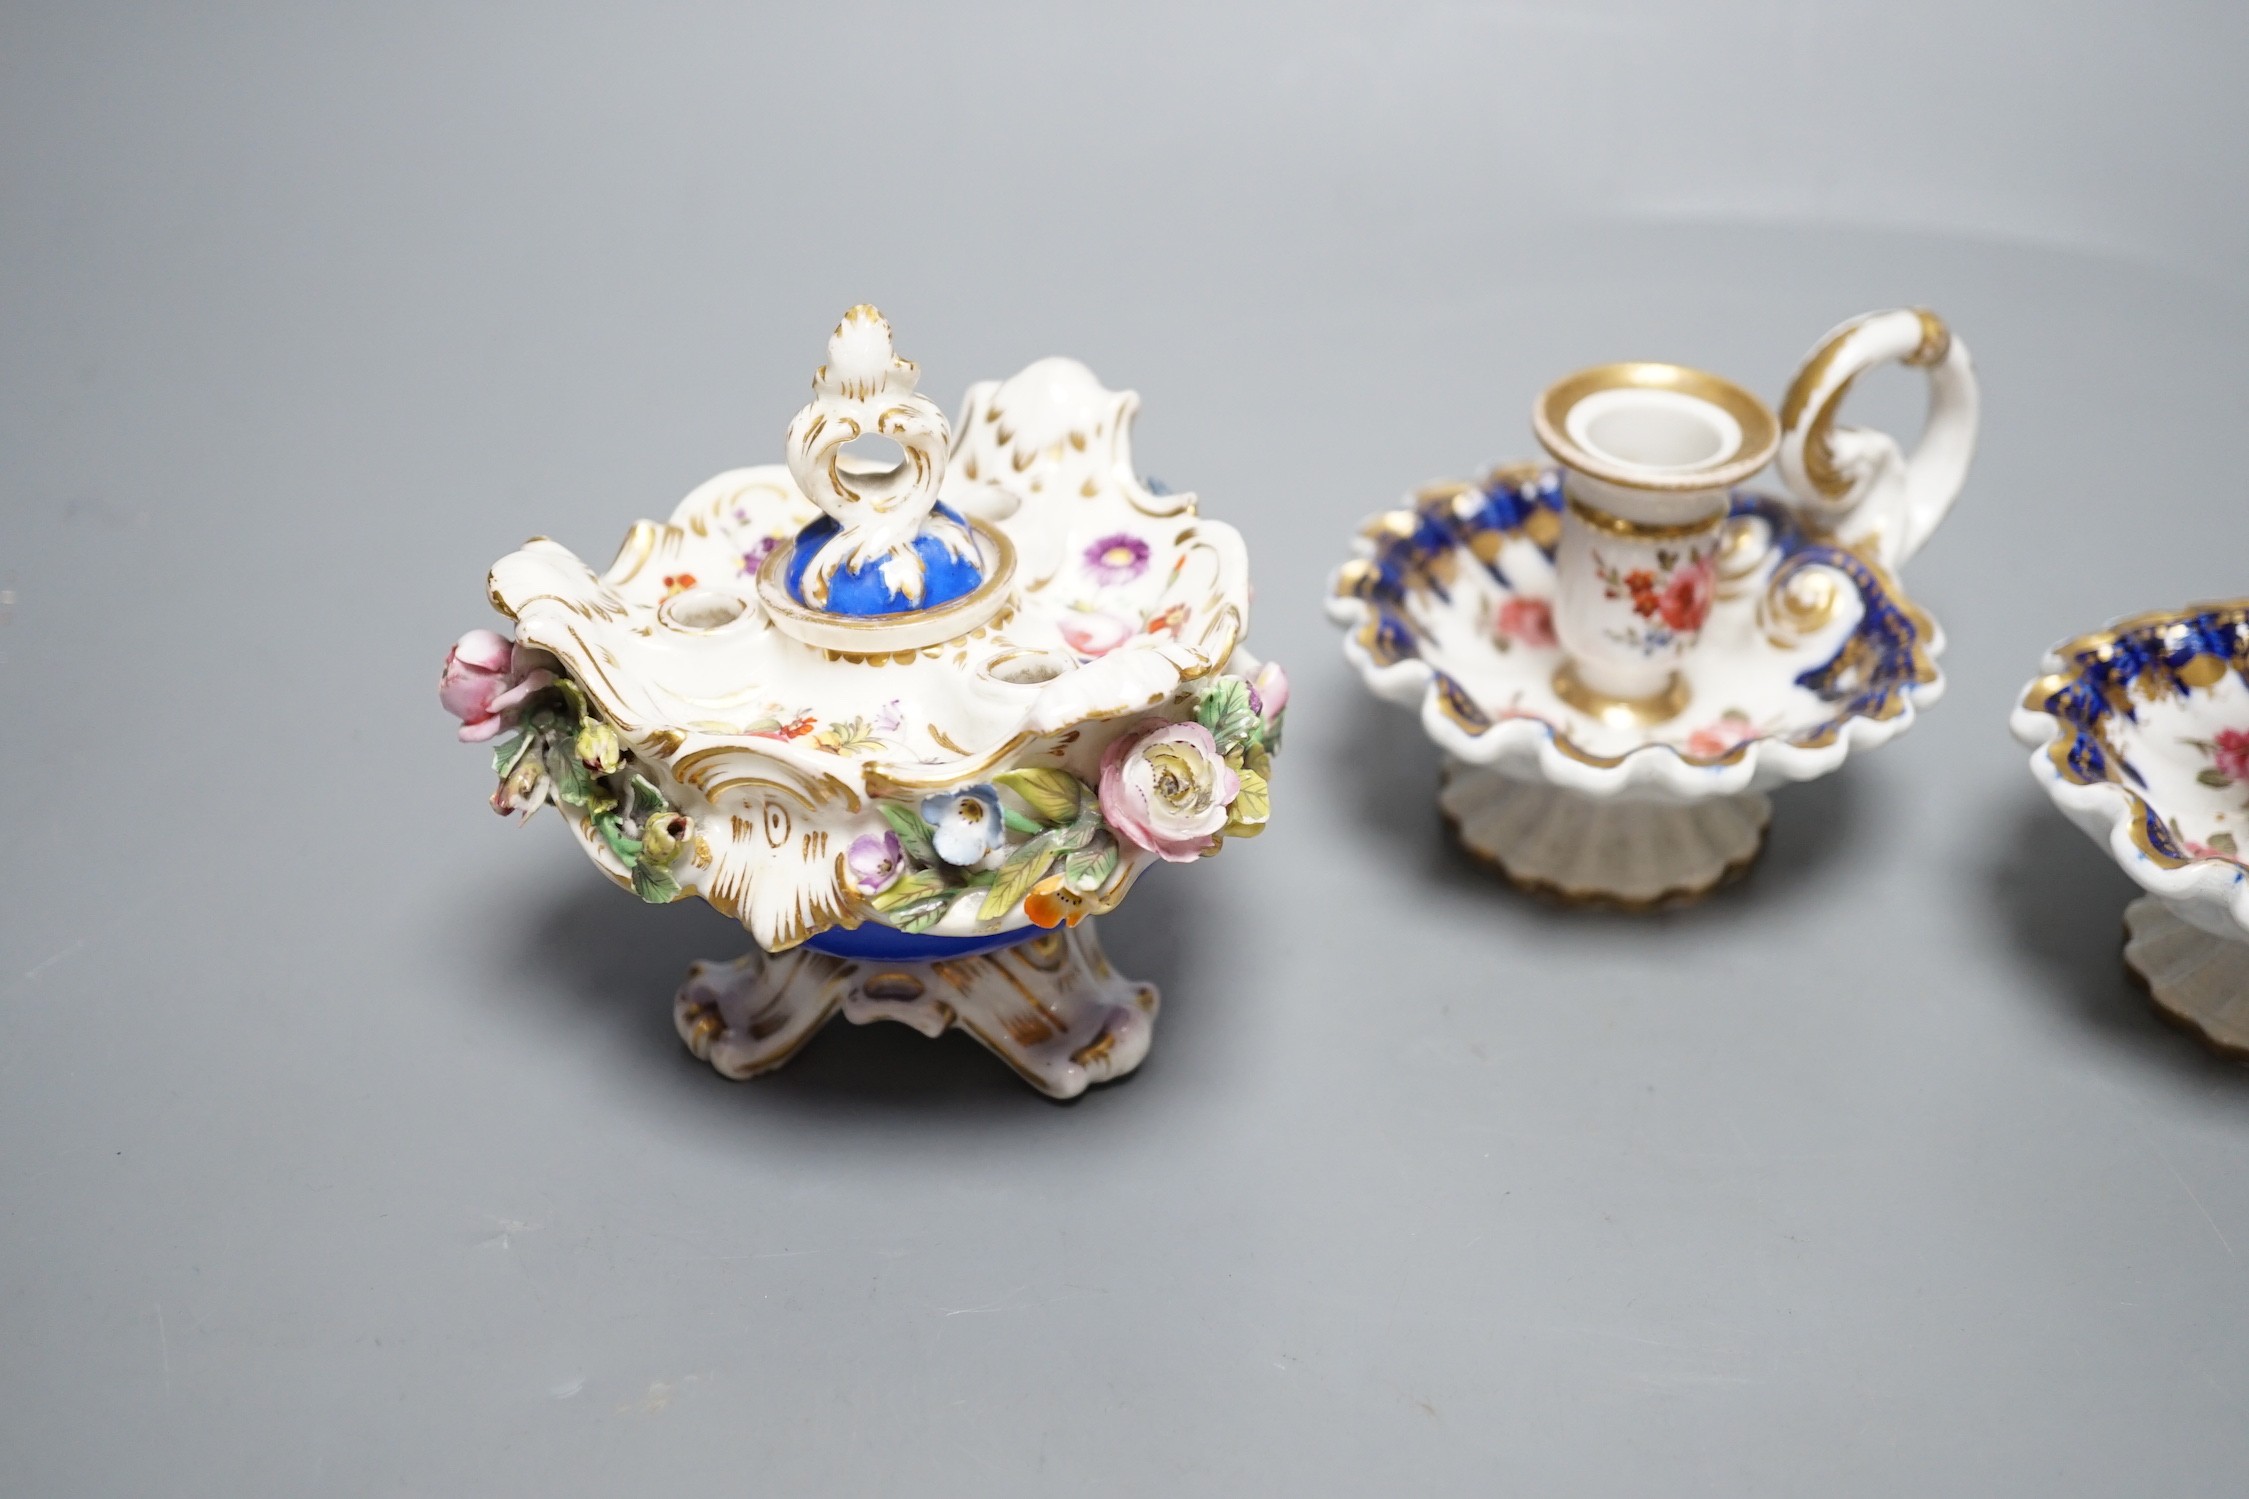 A Coalport floral encrusted inkwell cover and liner, marked C-Dale in blue and two English porcelain tapersticks painted with roses perhaps Coalport, c.1820